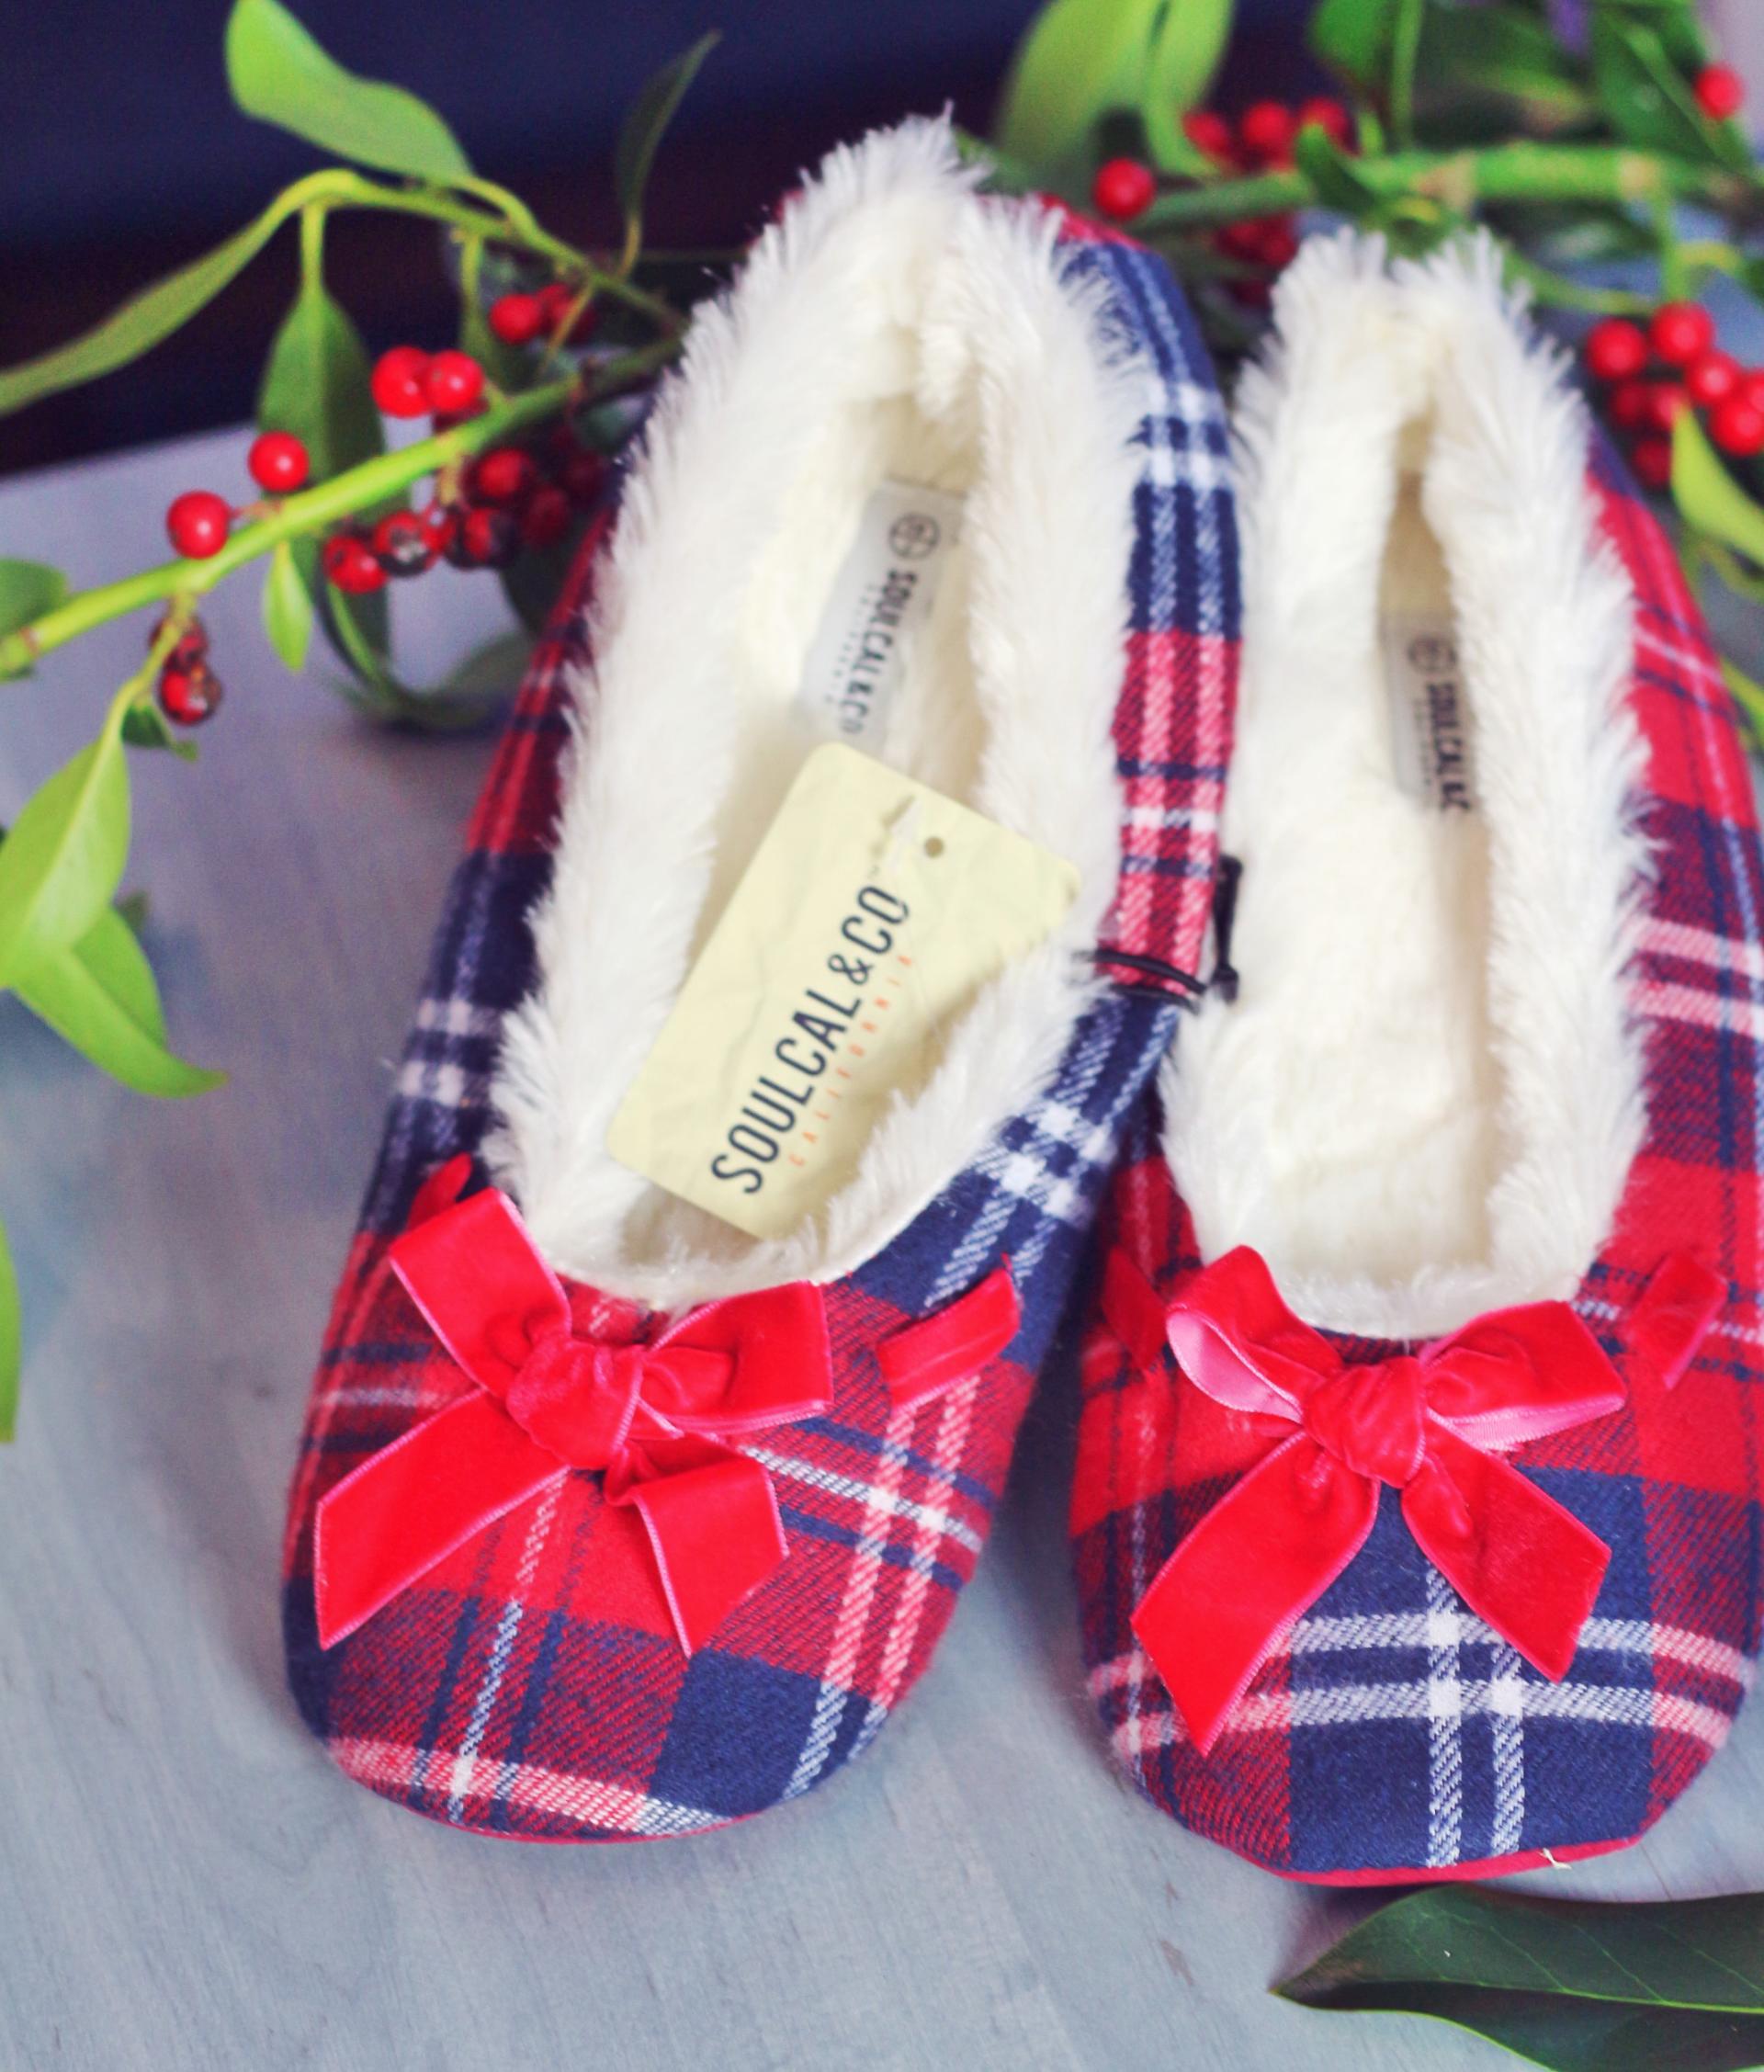 soulcal slippers stocking fillers